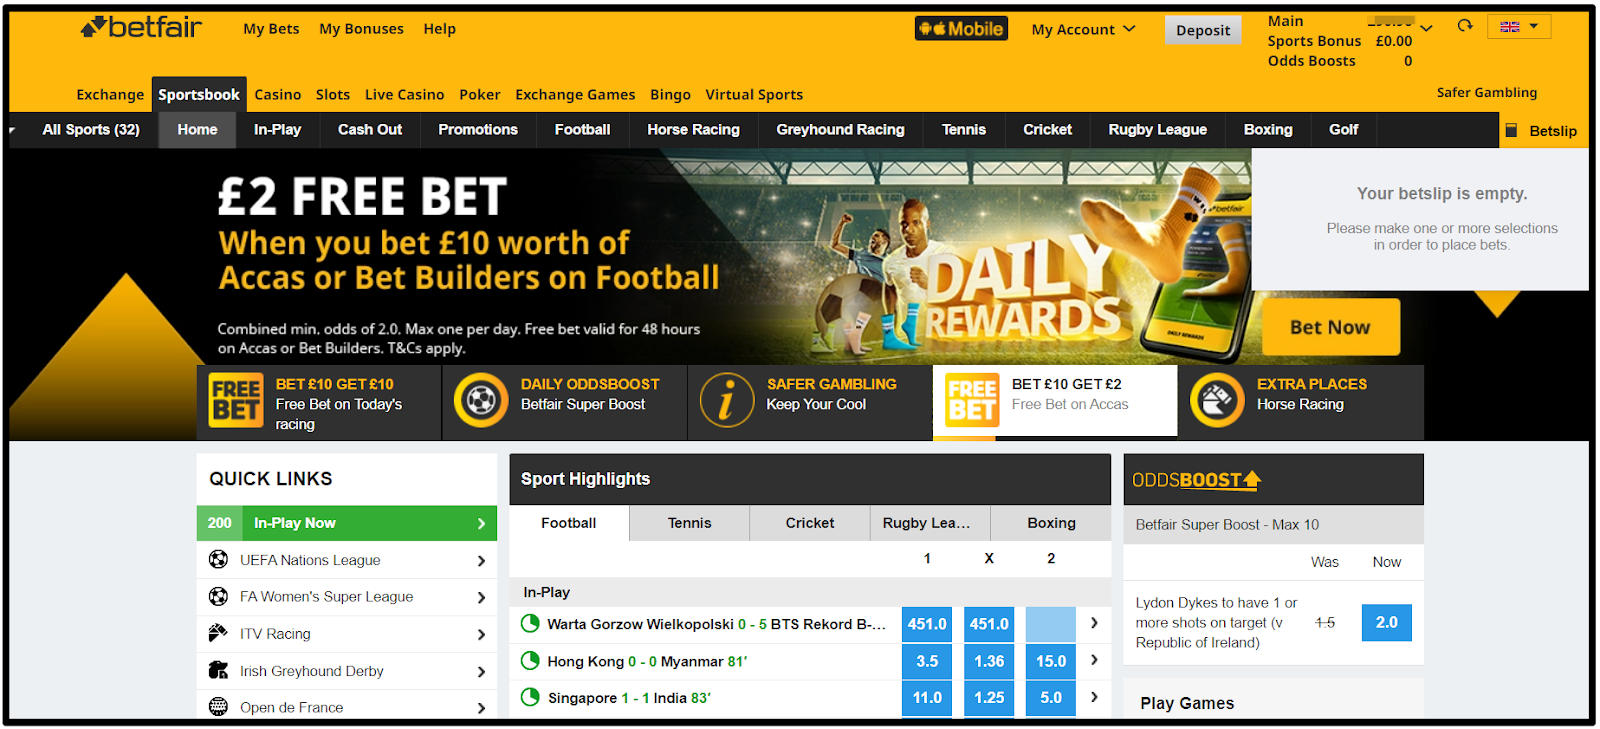 Betfair Sportsbook starting screen once logged into your Betfair account.